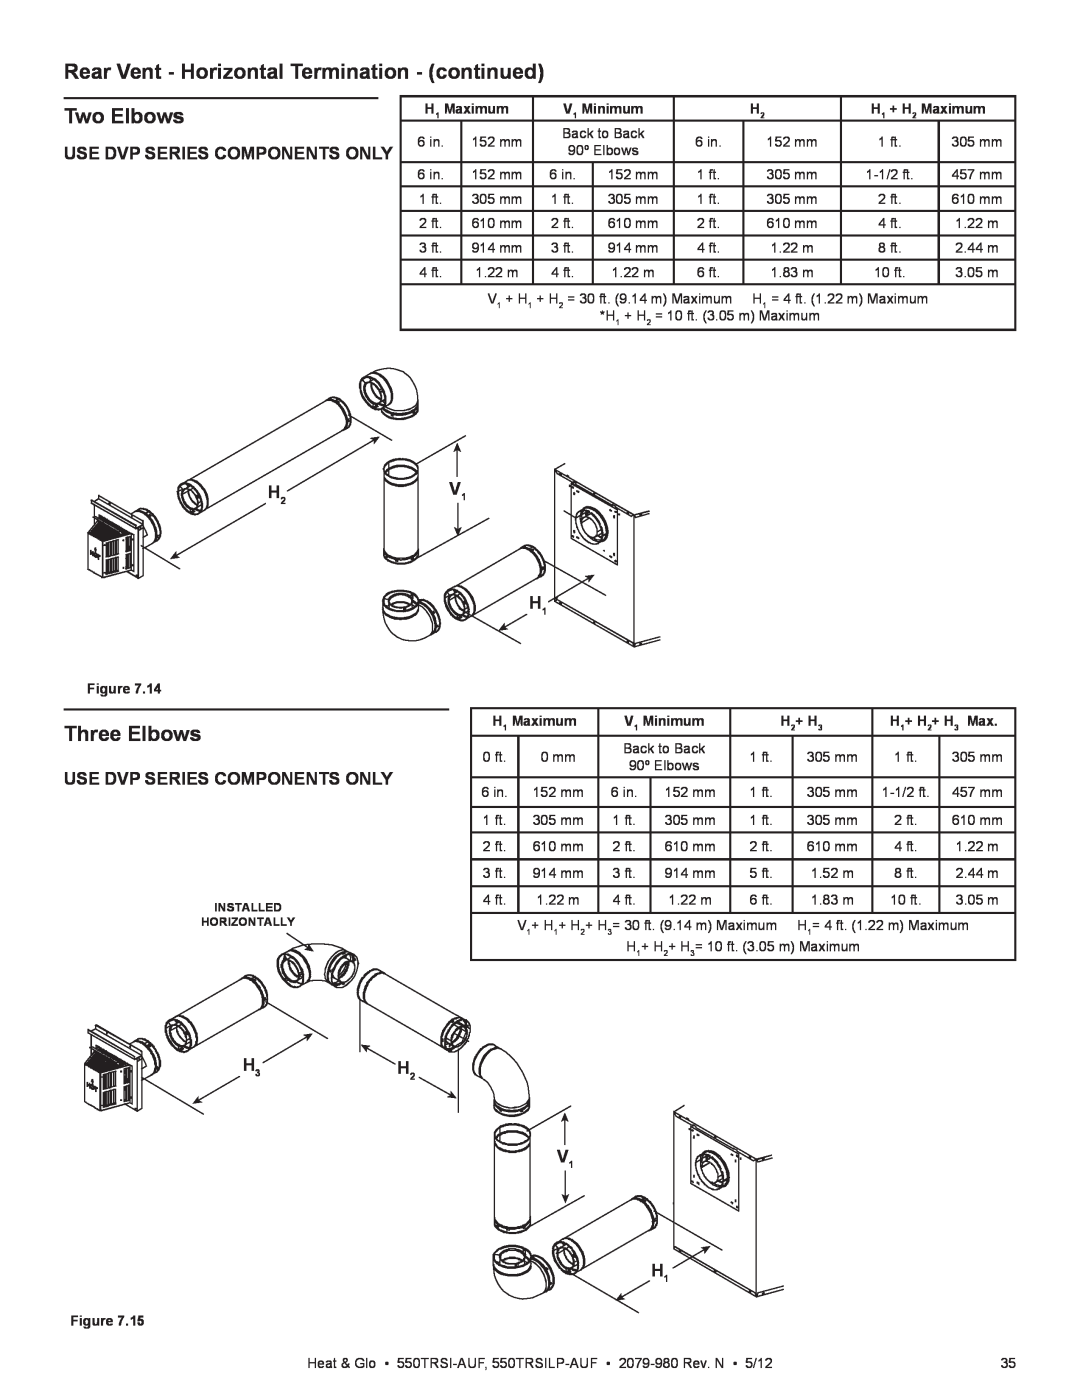 Heat & Glo LifeStyle 550TRSI-AUF Rear Vent - Horizontal Termination - continued, Two Elbows, Three Elbows, H3H2 V1, Figure 